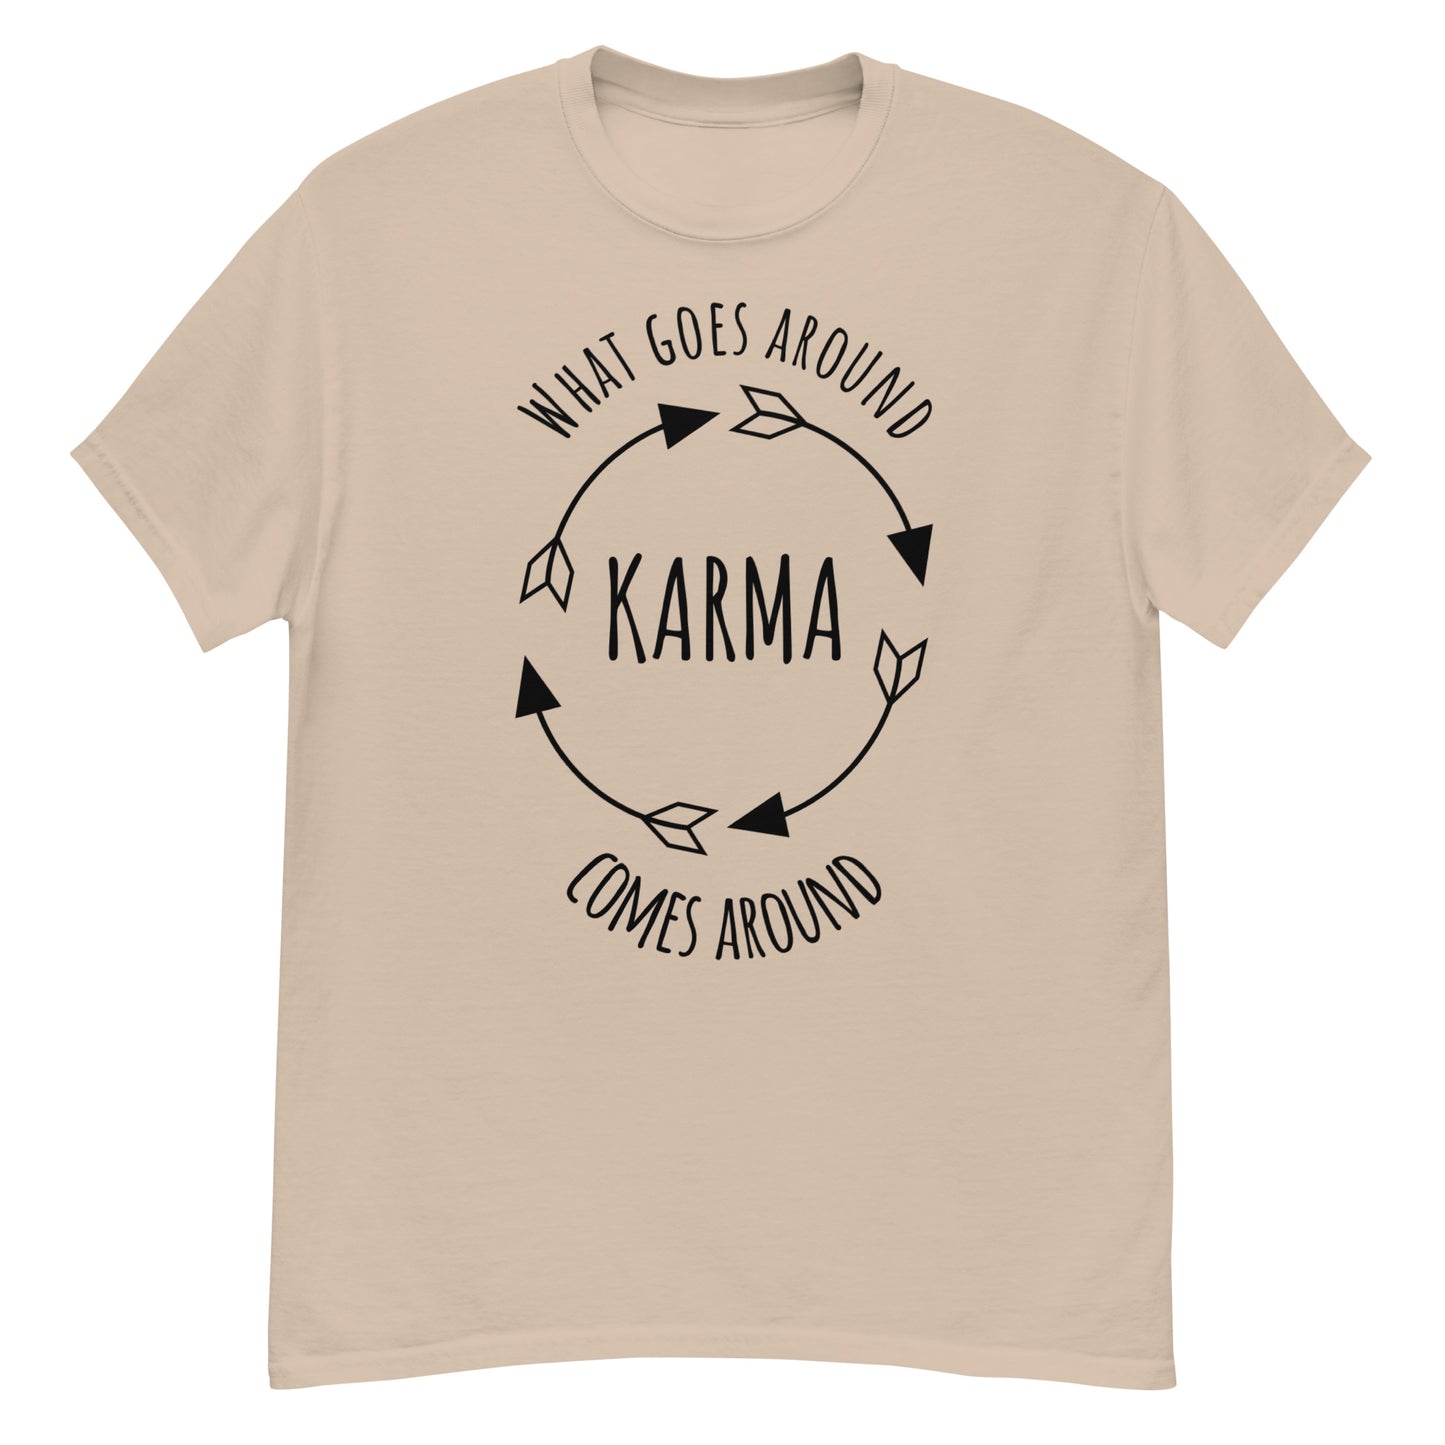 KARMA - what goes around come around - classic tee (black lettering)